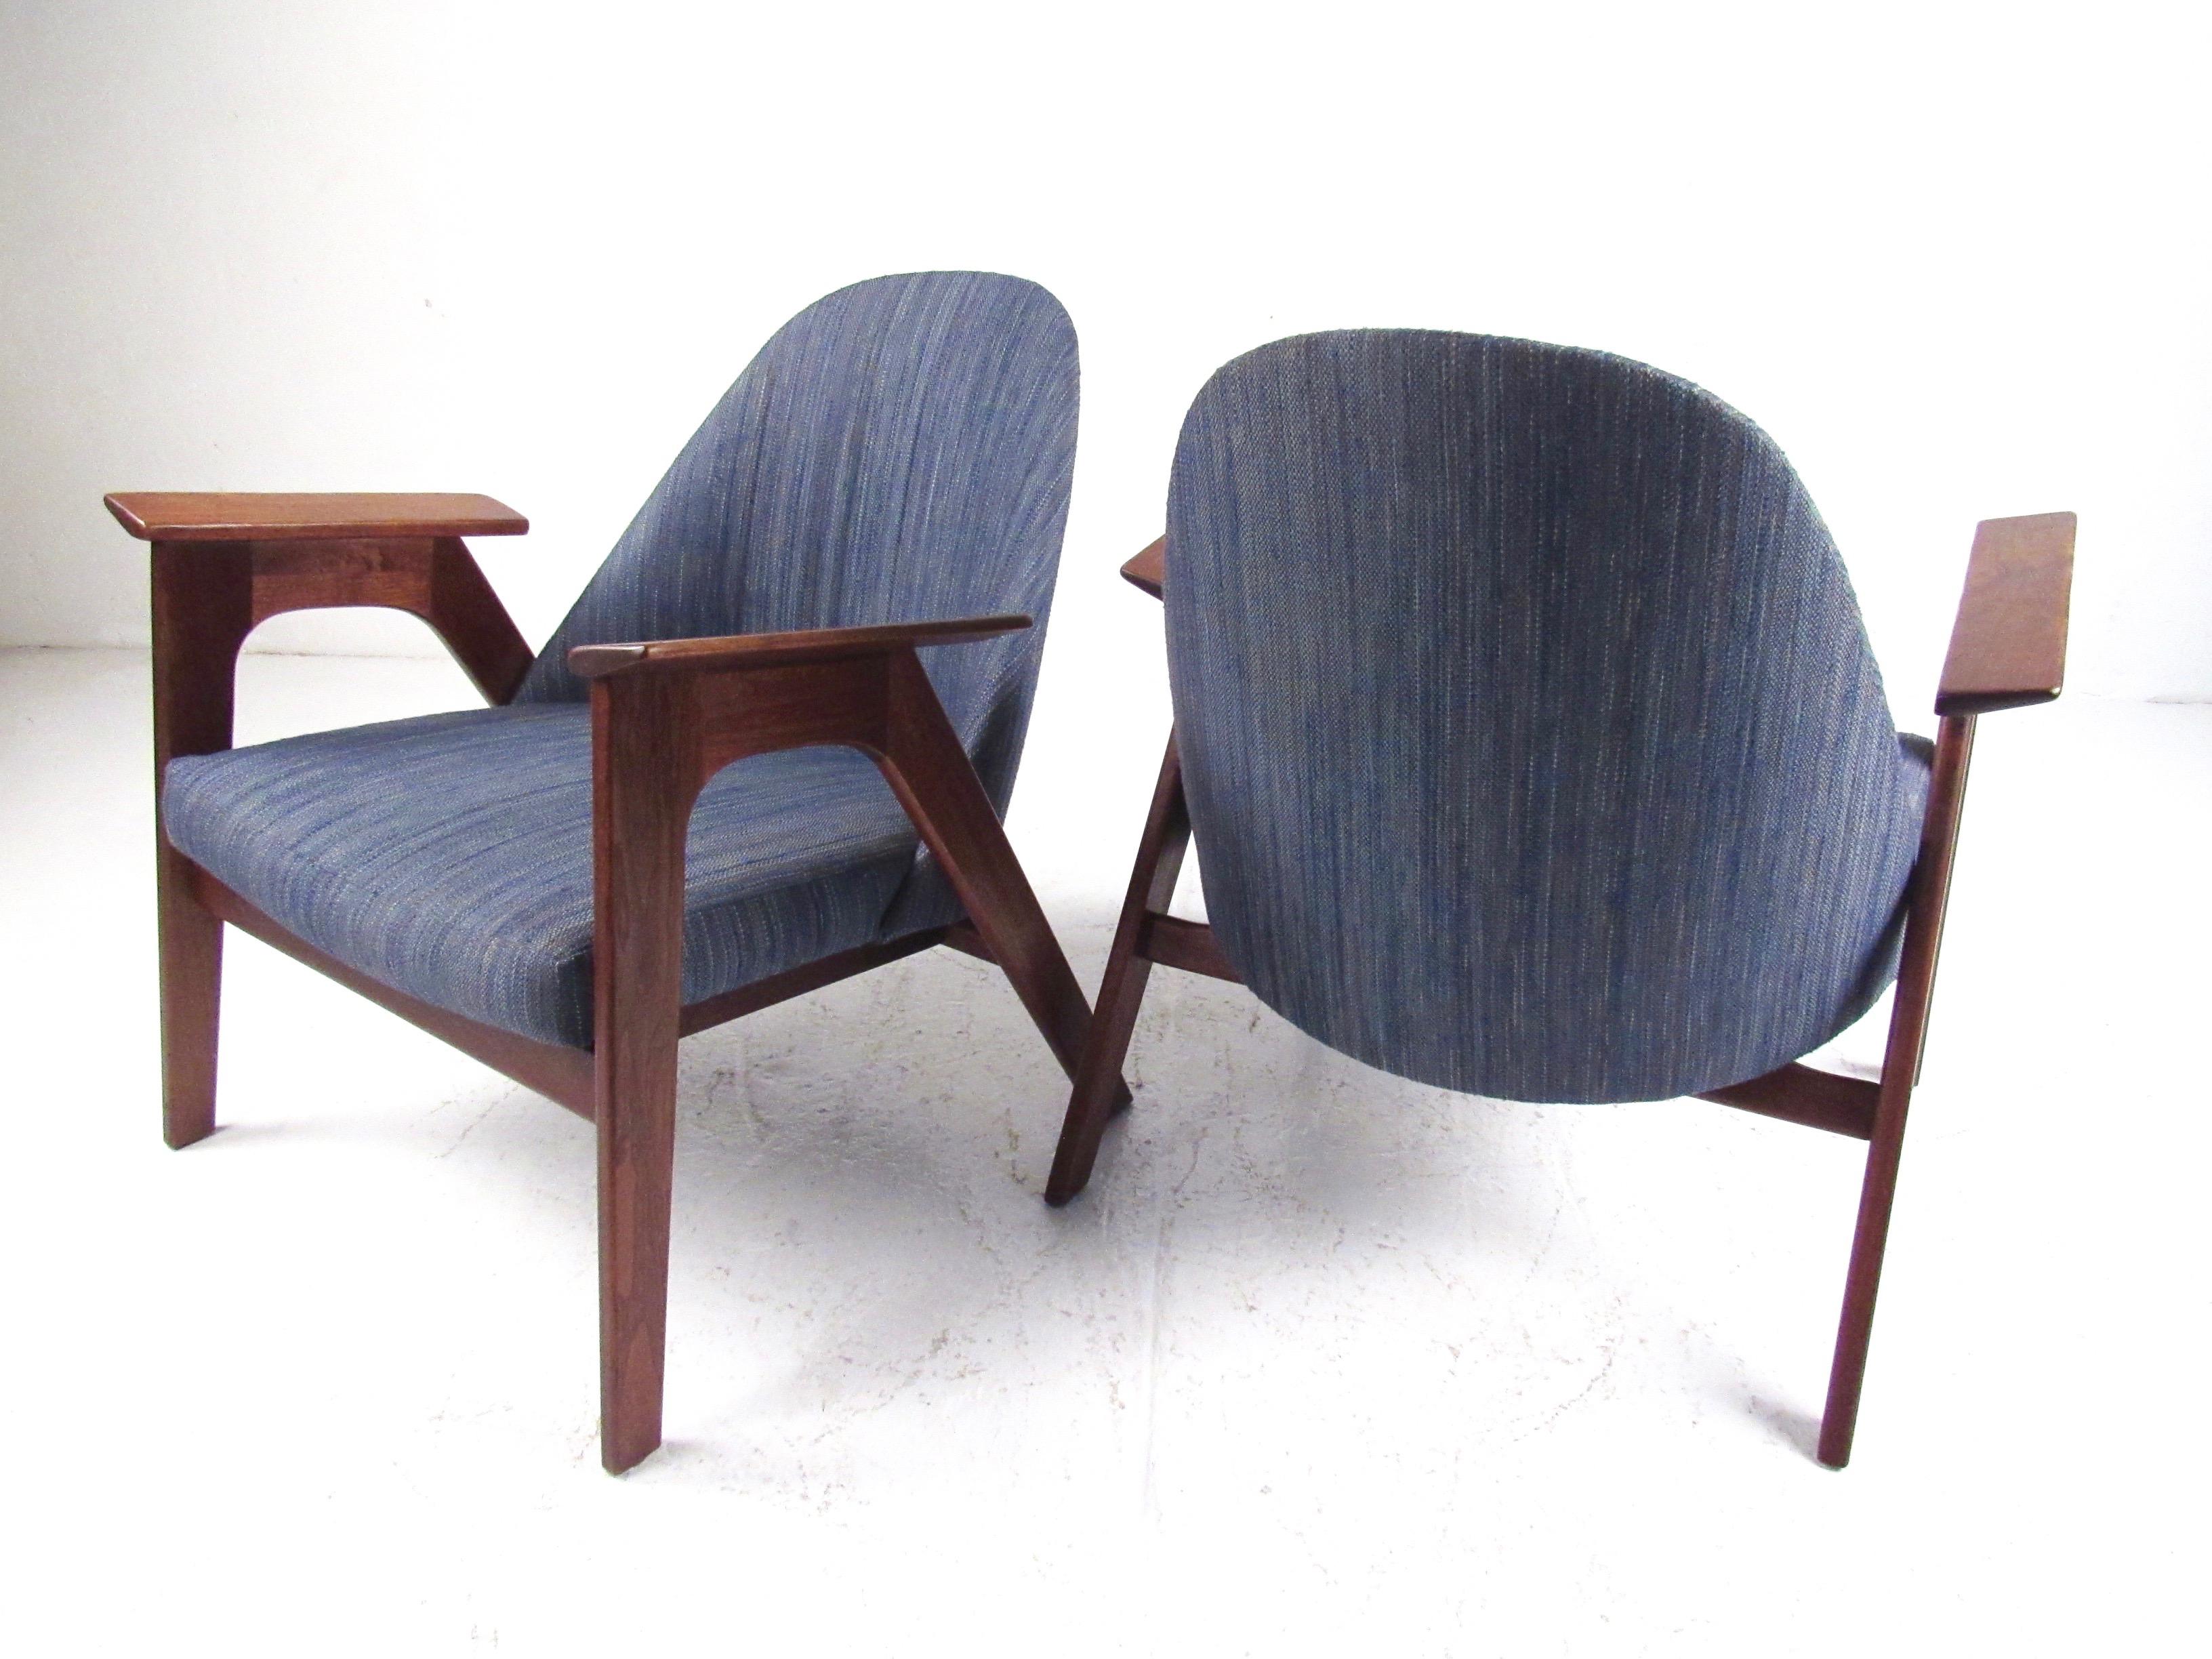 Pair of Scandinavian Modern Lounge Chairs After Kofod-Larsen In Good Condition For Sale In Brooklyn, NY